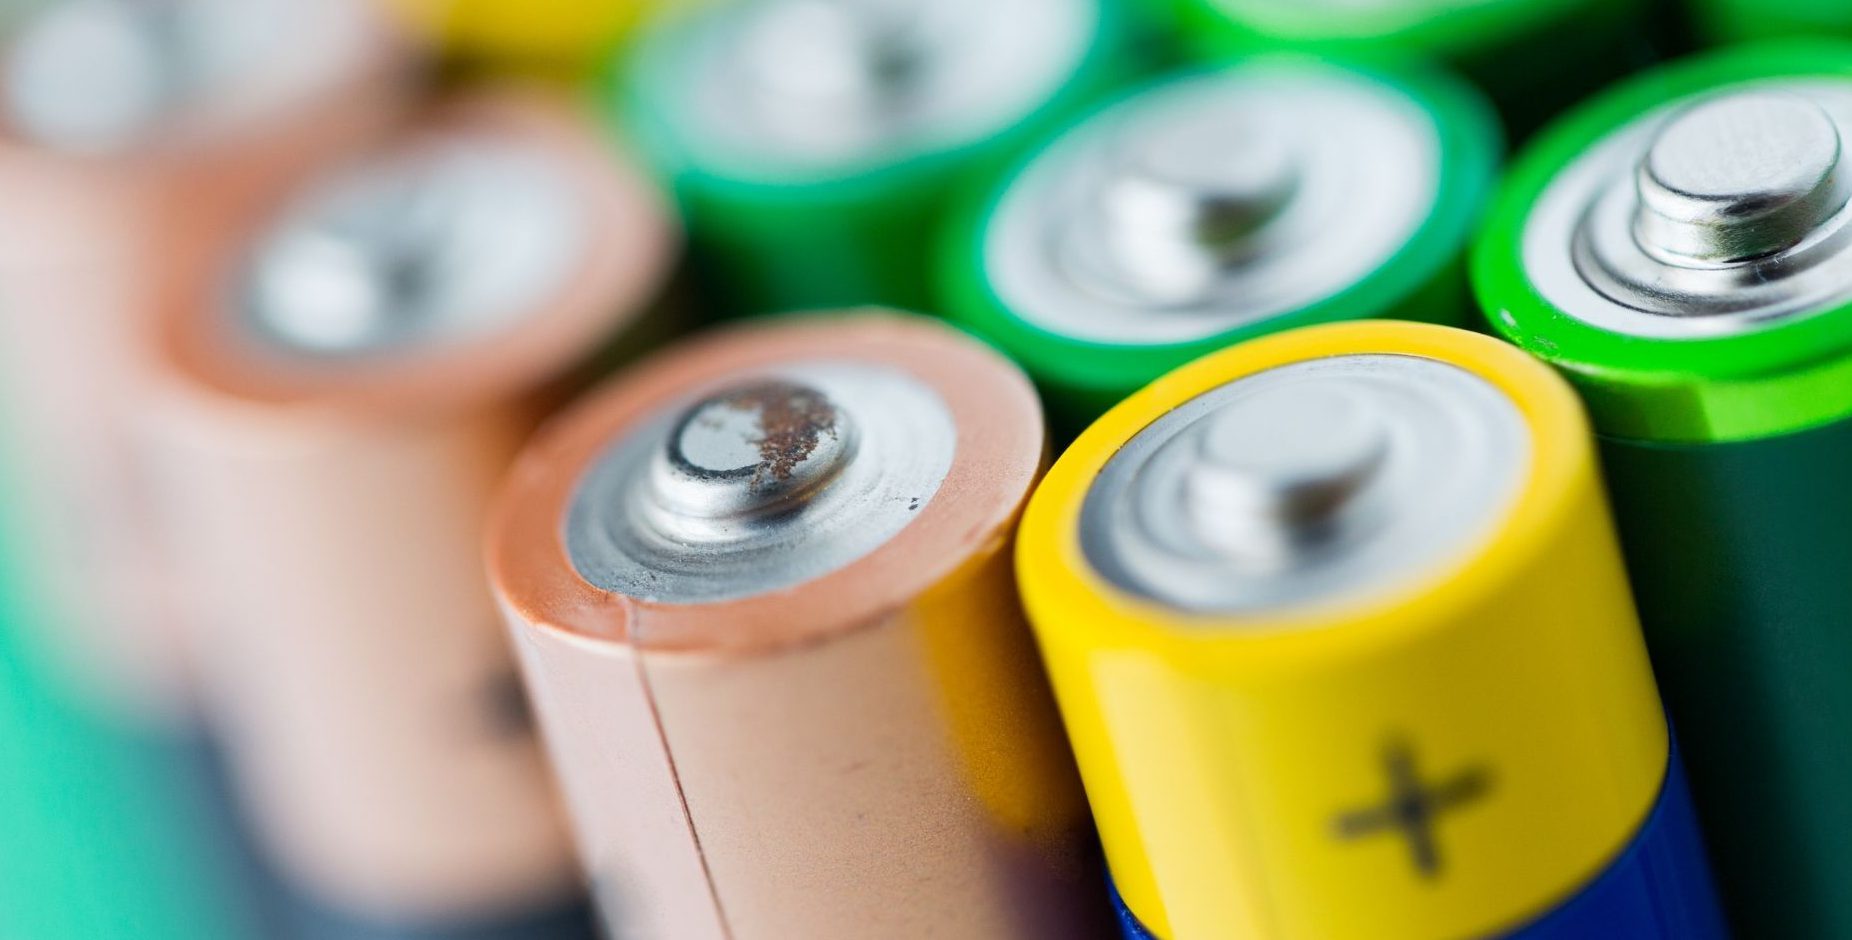 Global Lithium Sulfur Batteries Market Outlook, Opportunities And Strategies – Includes Lithium Sulfur Batteries Market Size